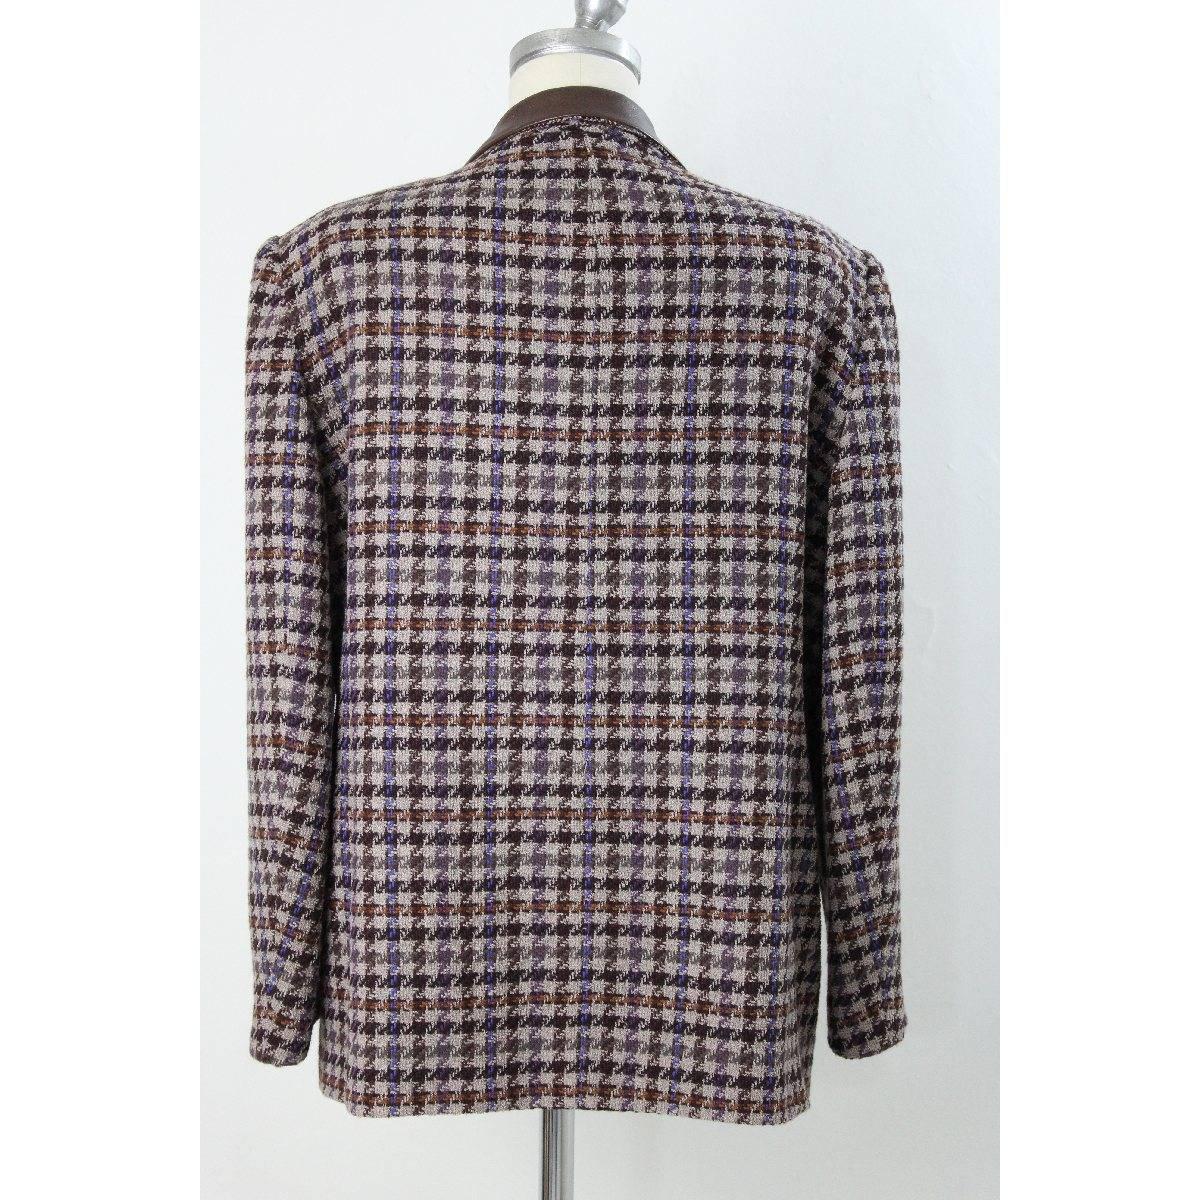 Laura Biagiotti vintage tweed woman jacket 1980s. Beautiful wool check fabric. Beige and brown color, with purple inserts. Leather inserts on neck and pockets. Size 48, made in italy. excellent vintage conditions

Size: 48 It 14 Us 16 Uk 42 De 44